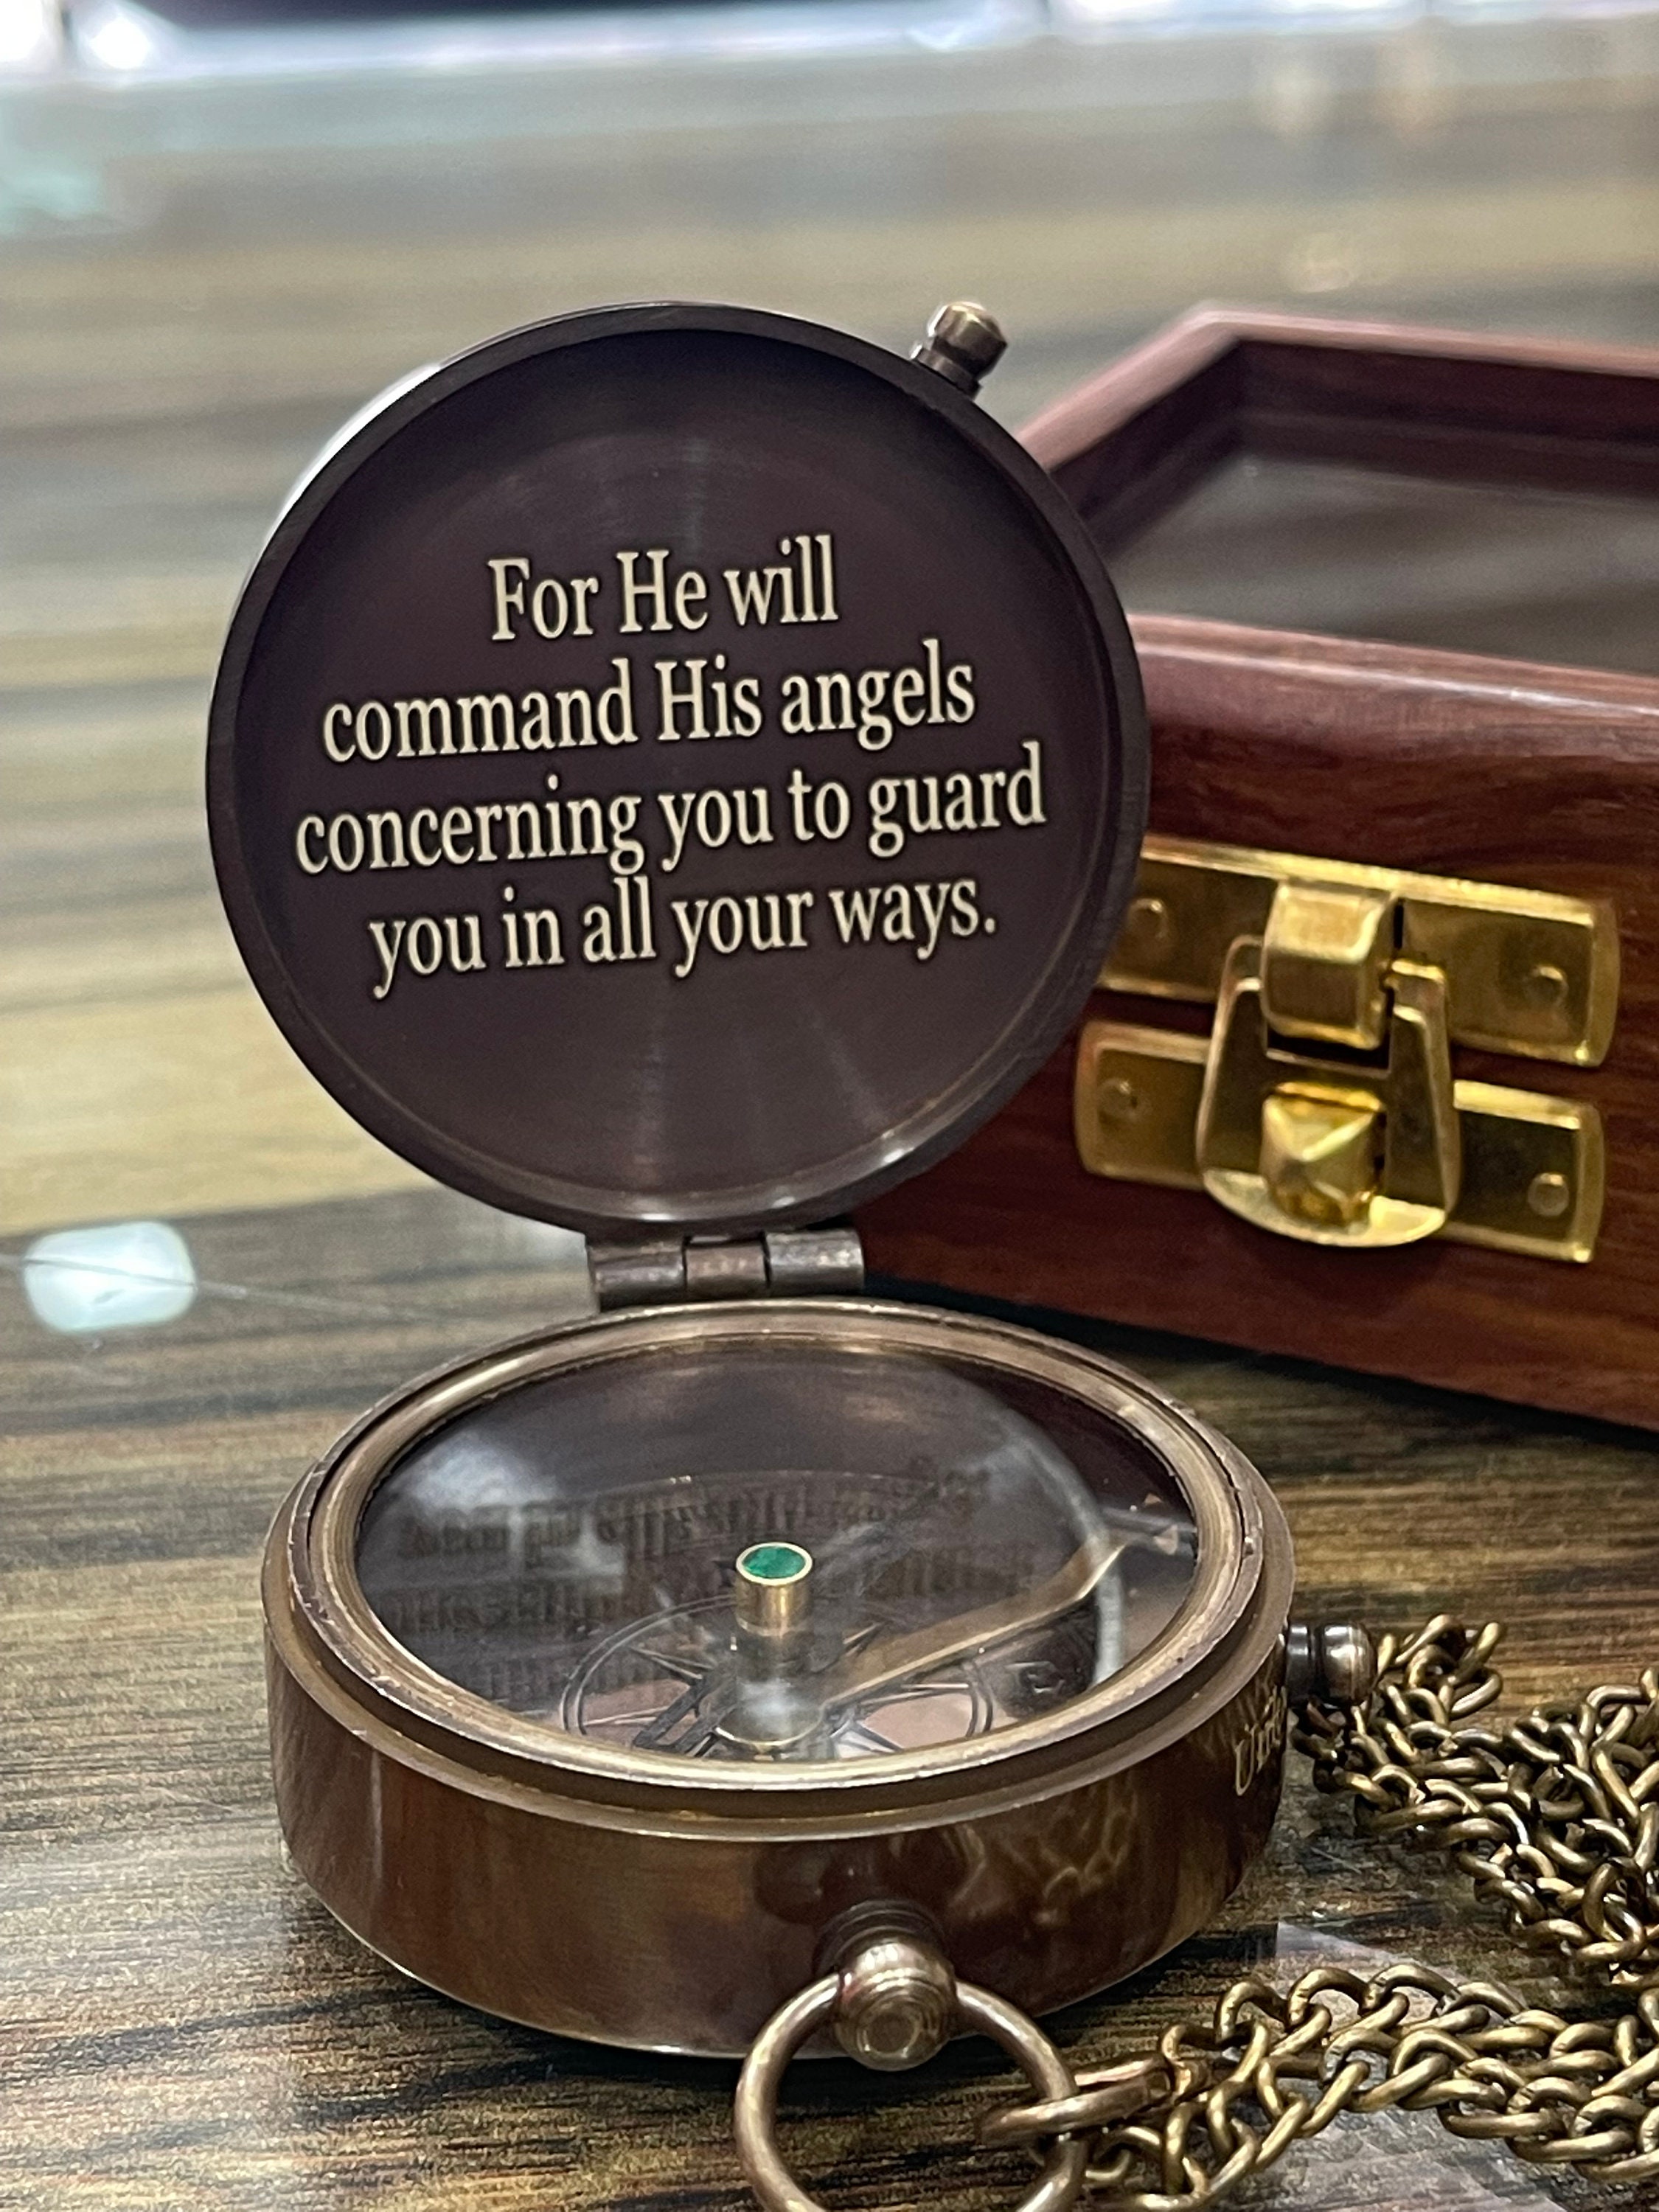 Retirement Graduation Gift Baptism Engraved Brass Compass Christmas Gift Anniversary Personalized Pocket Compass Personalized Wedding